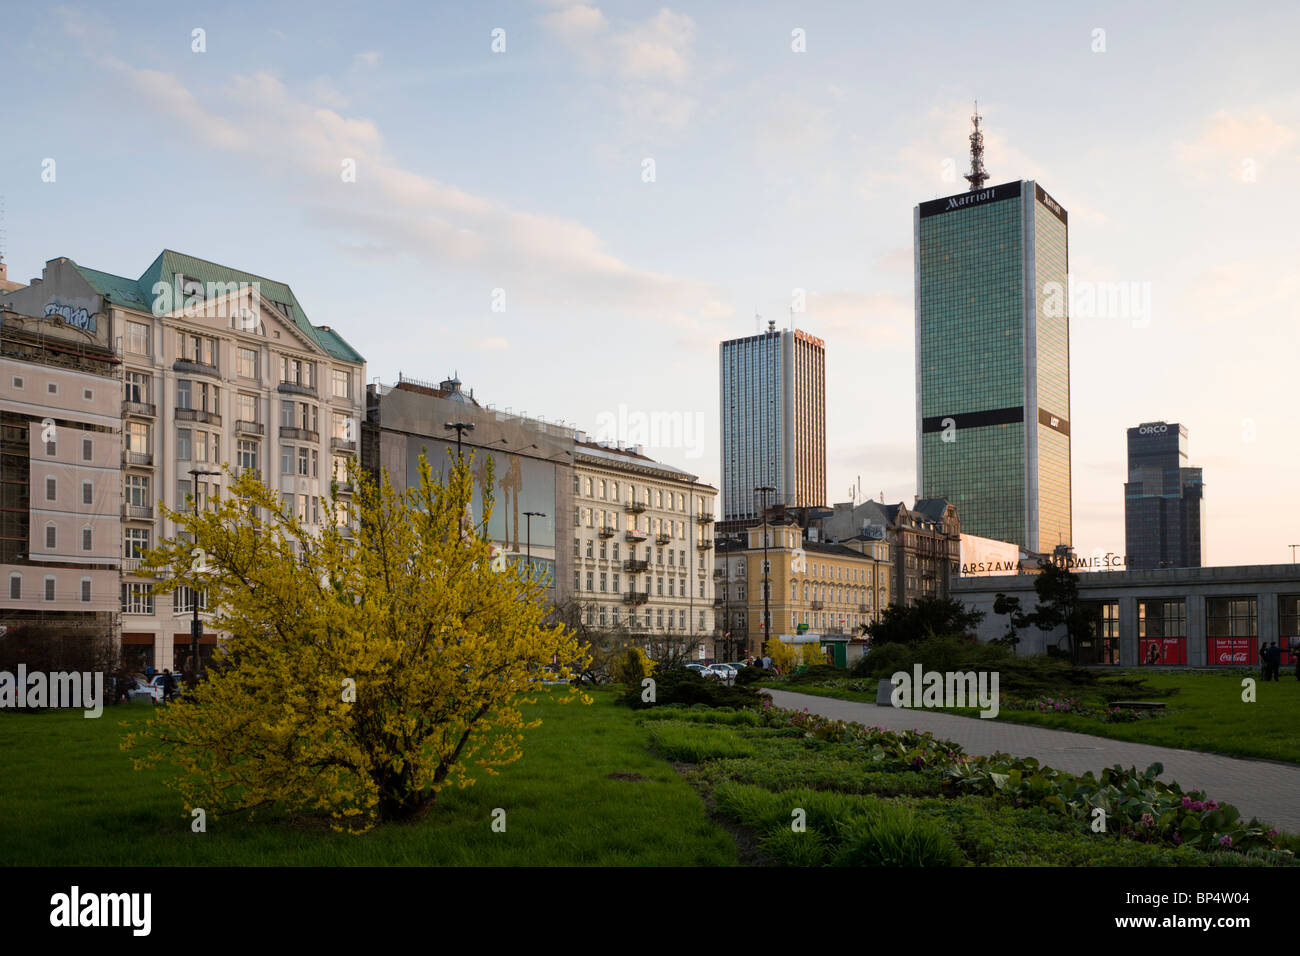 Marriott Hotel seen from Parade Square (Plac Defilad), next to The Palace of Culture and Science, Warsaw Poland Stock Photo